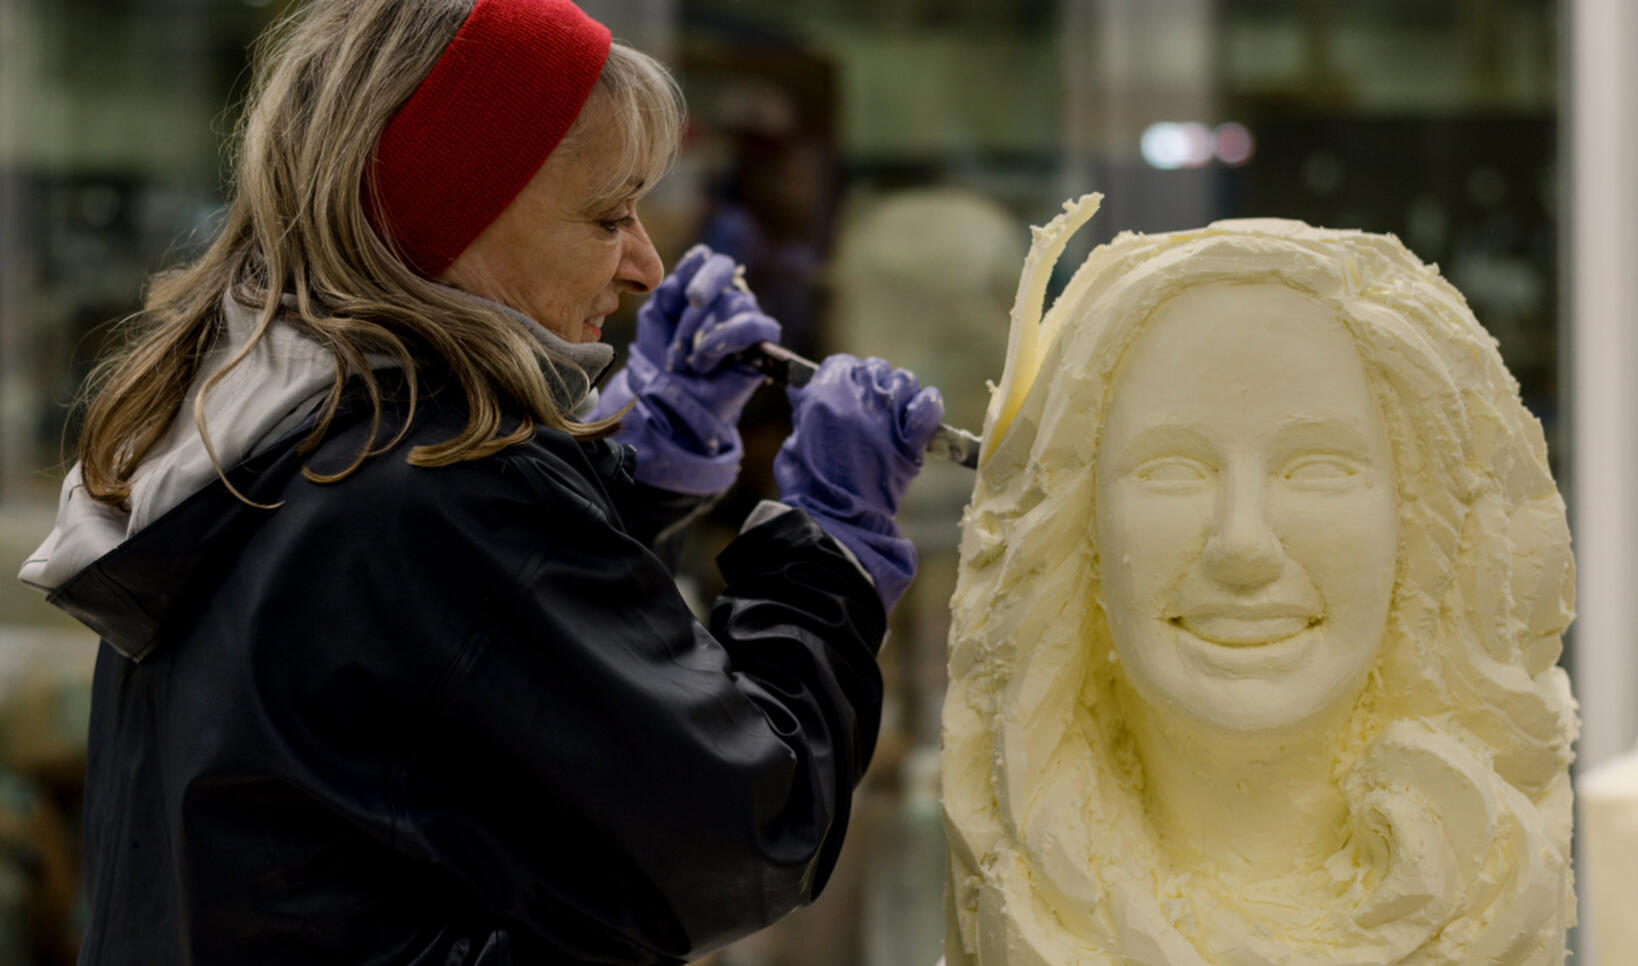 A woman is shown carving a bust of another woman out of butter